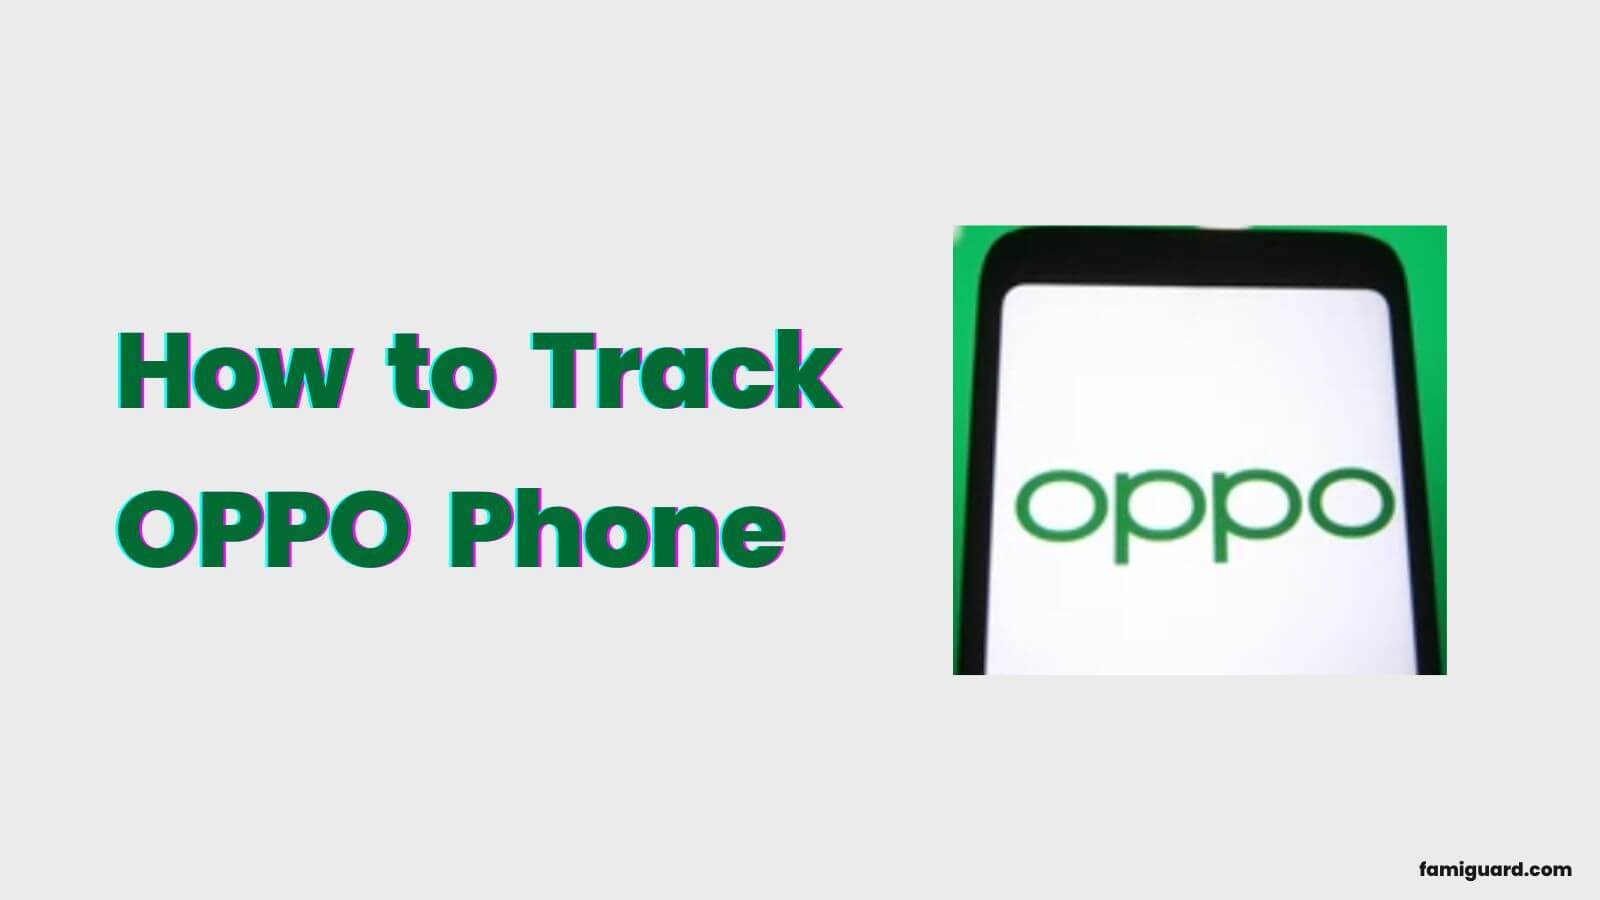 -How to Track OPPO Phone